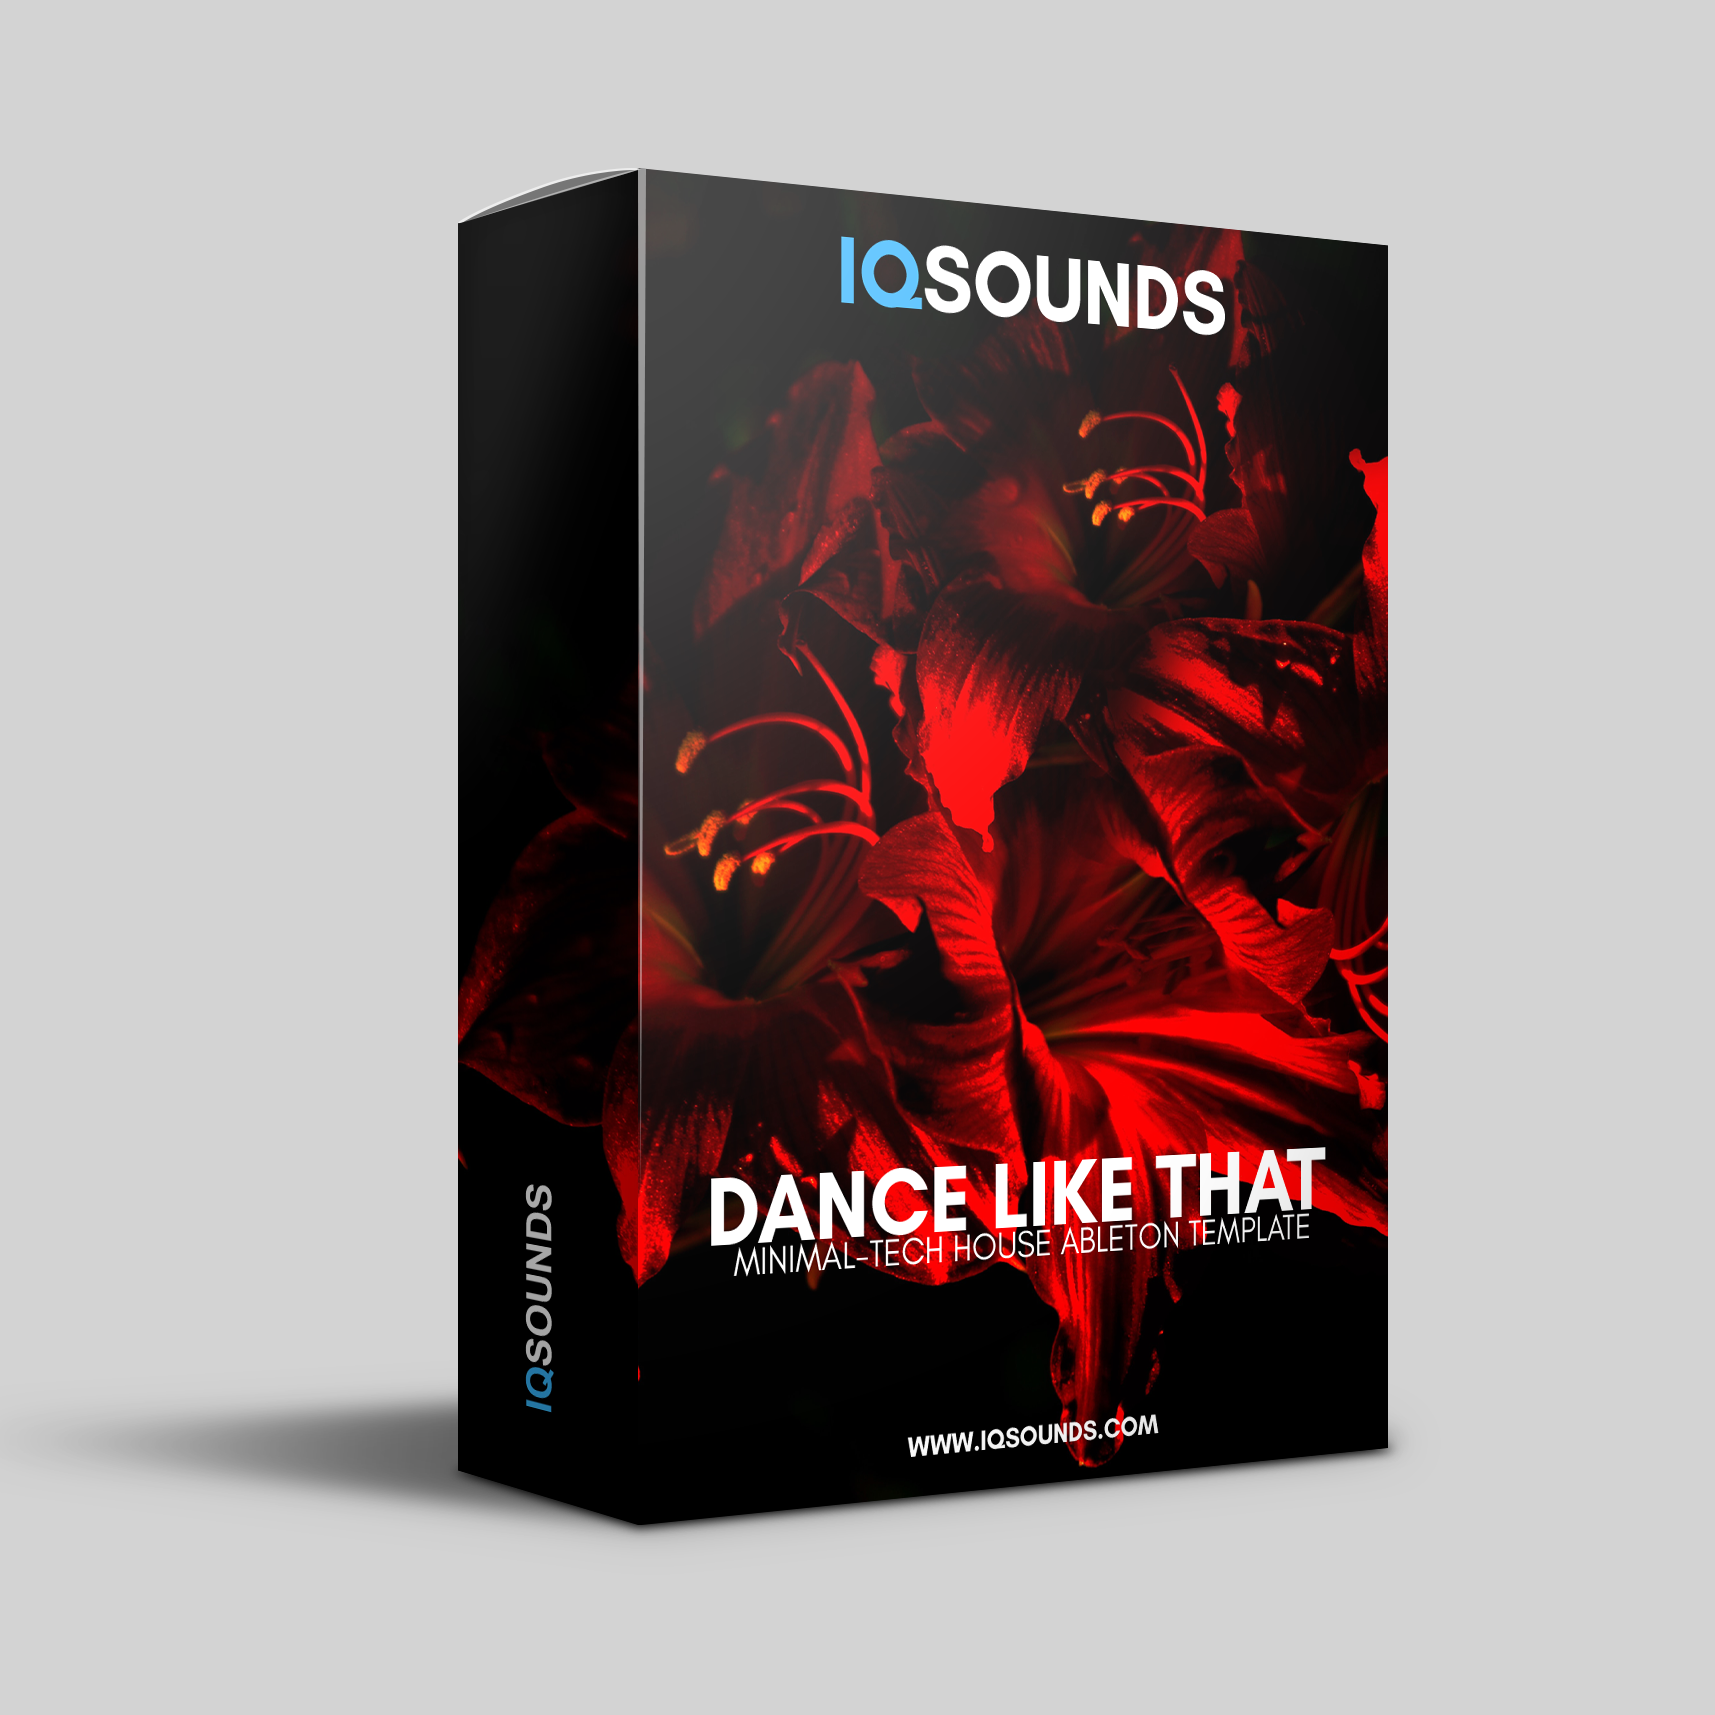 dance like that, iqsounds, ableton template, minimal template, minimal ableton template, tech house ableton template, tech house sample pack, tech house samples, iqsounds samples, iqsounds ableton, ableton template iqsounds